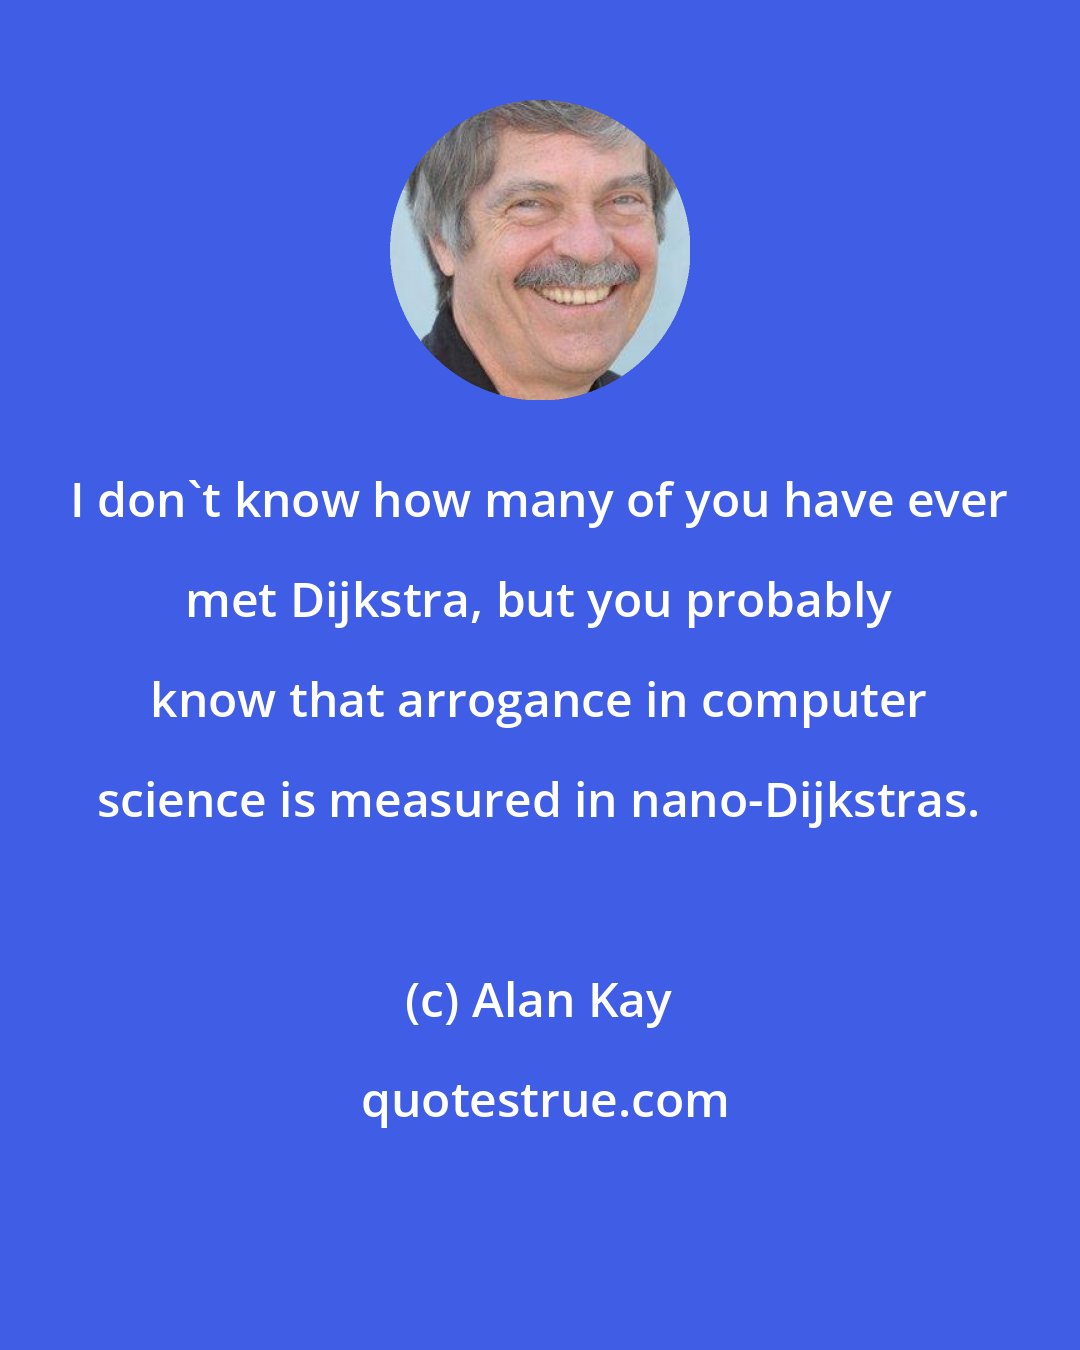 Alan Kay: I don't know how many of you have ever met Dijkstra, but you probably know that arrogance in computer science is measured in nano-Dijkstras.